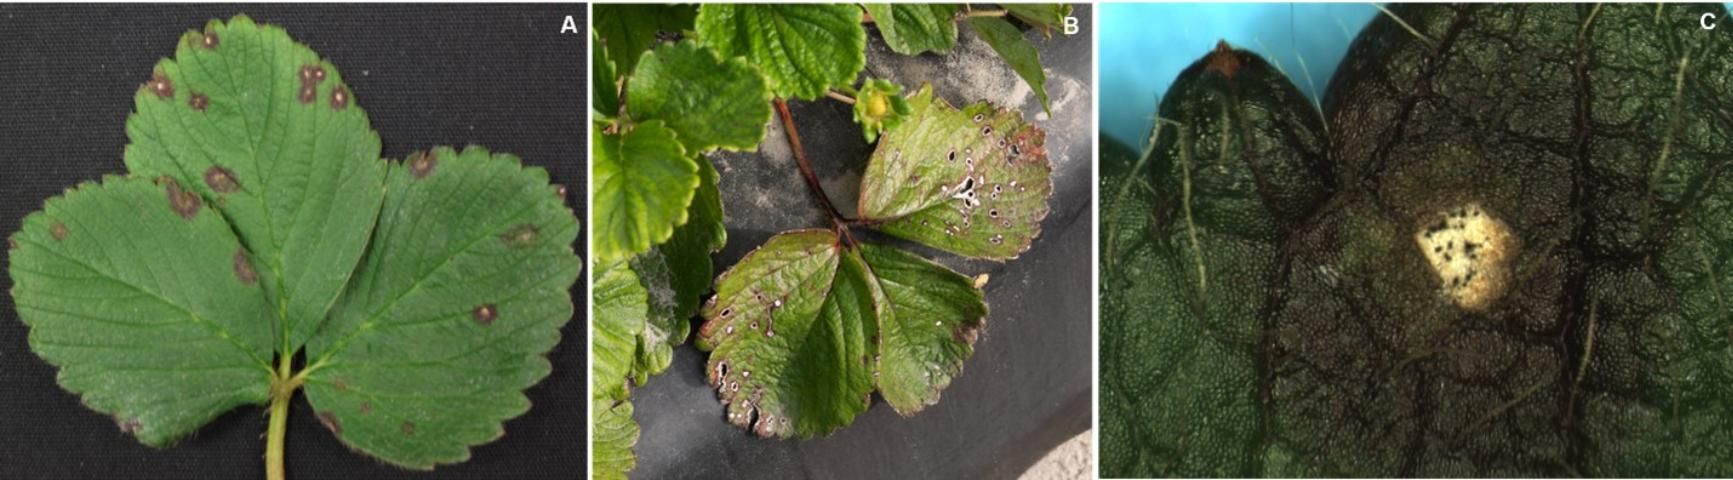 Figure 7. Cercospora leaf spot caused by the fungus Cercospora fragariae: A) small, circular purplish/reddish spots with light-colored centers; B) late-stage symptoms where the center of the spots become necrotic and fall out; and C) white centers of the spots covered with black stromata of the fungus.